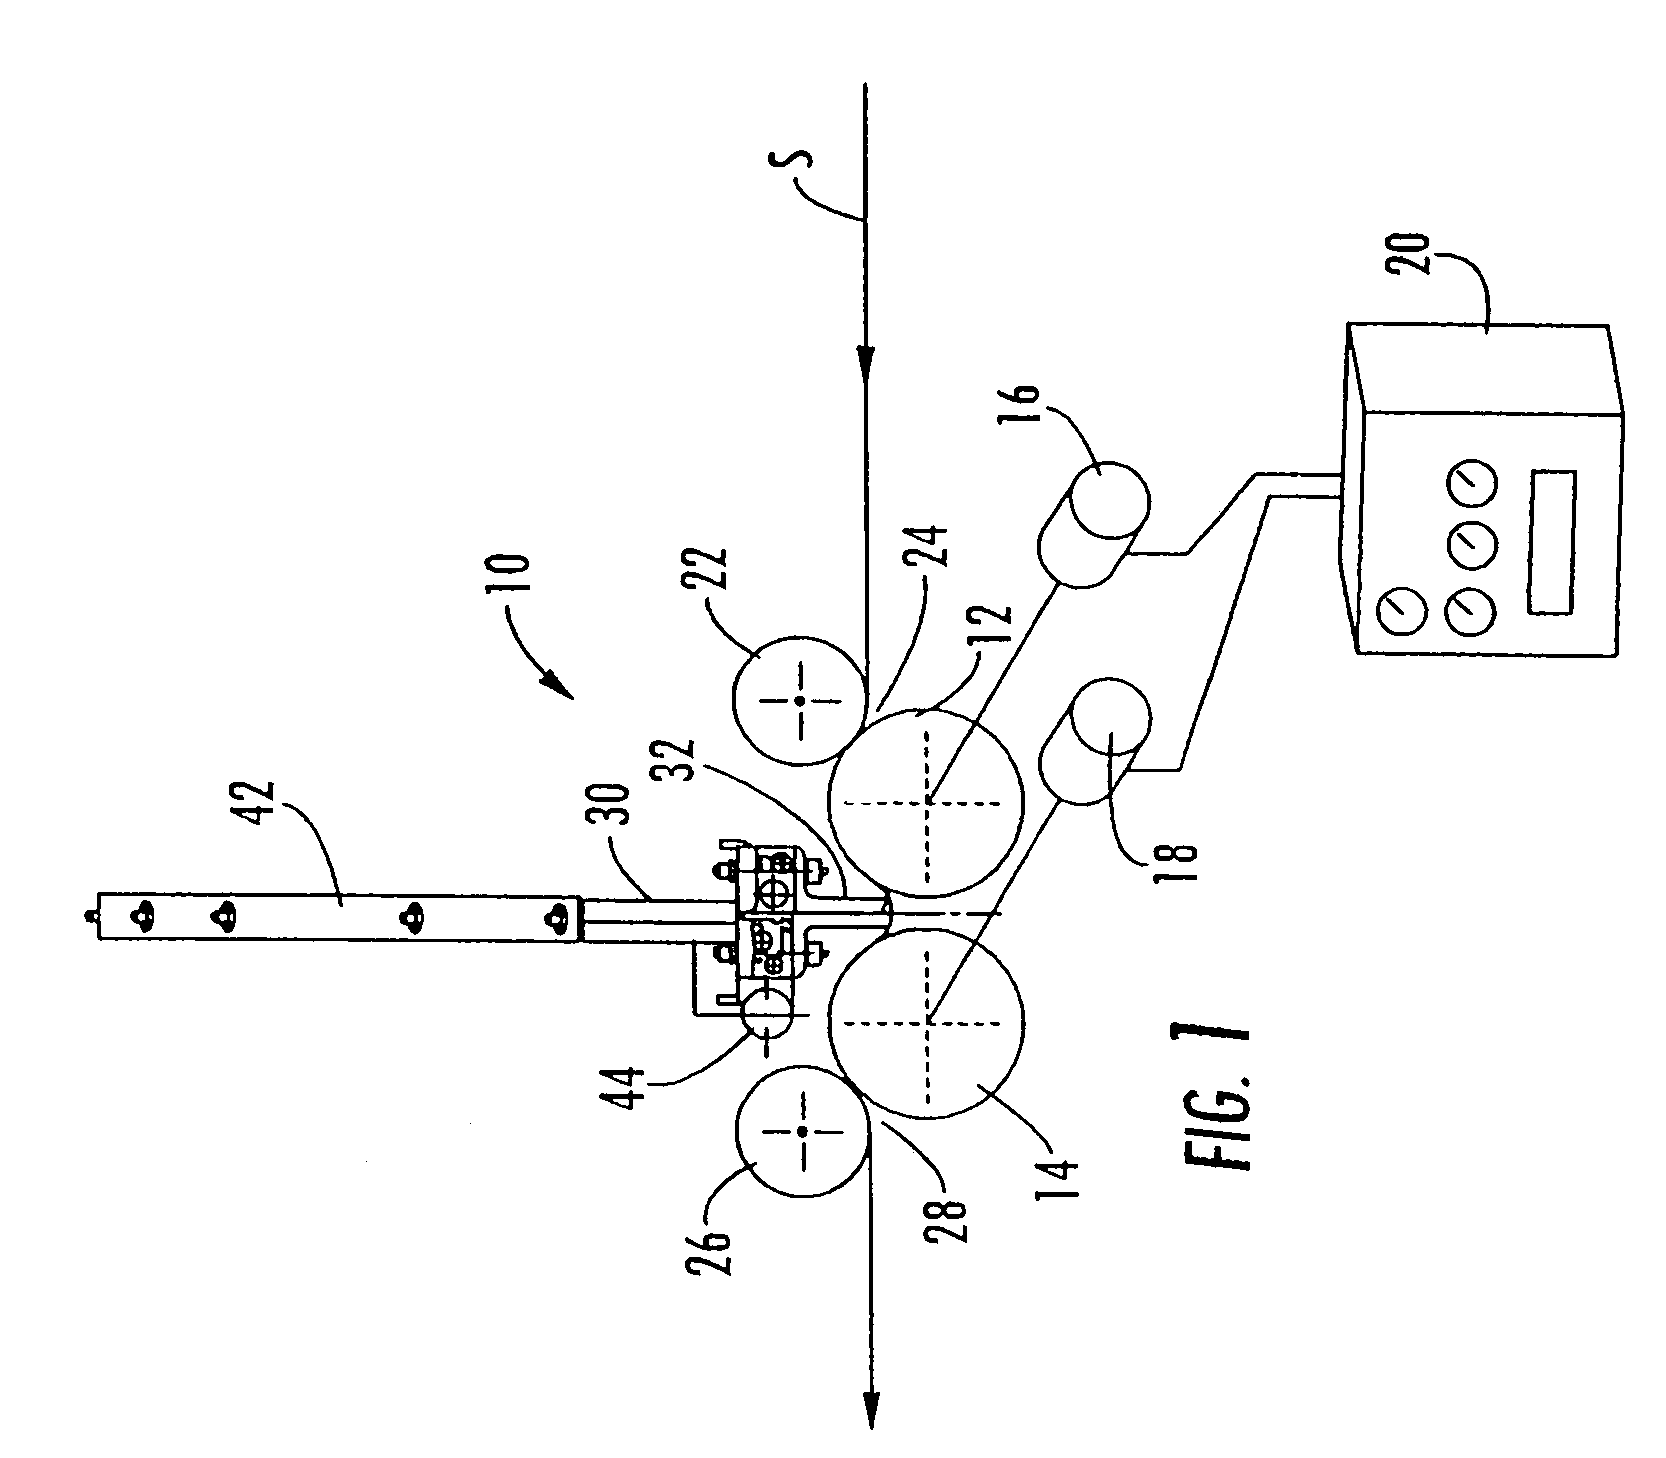 Apparatus and method for applying a foamed composition to a dimensionally unstable traveling substrate